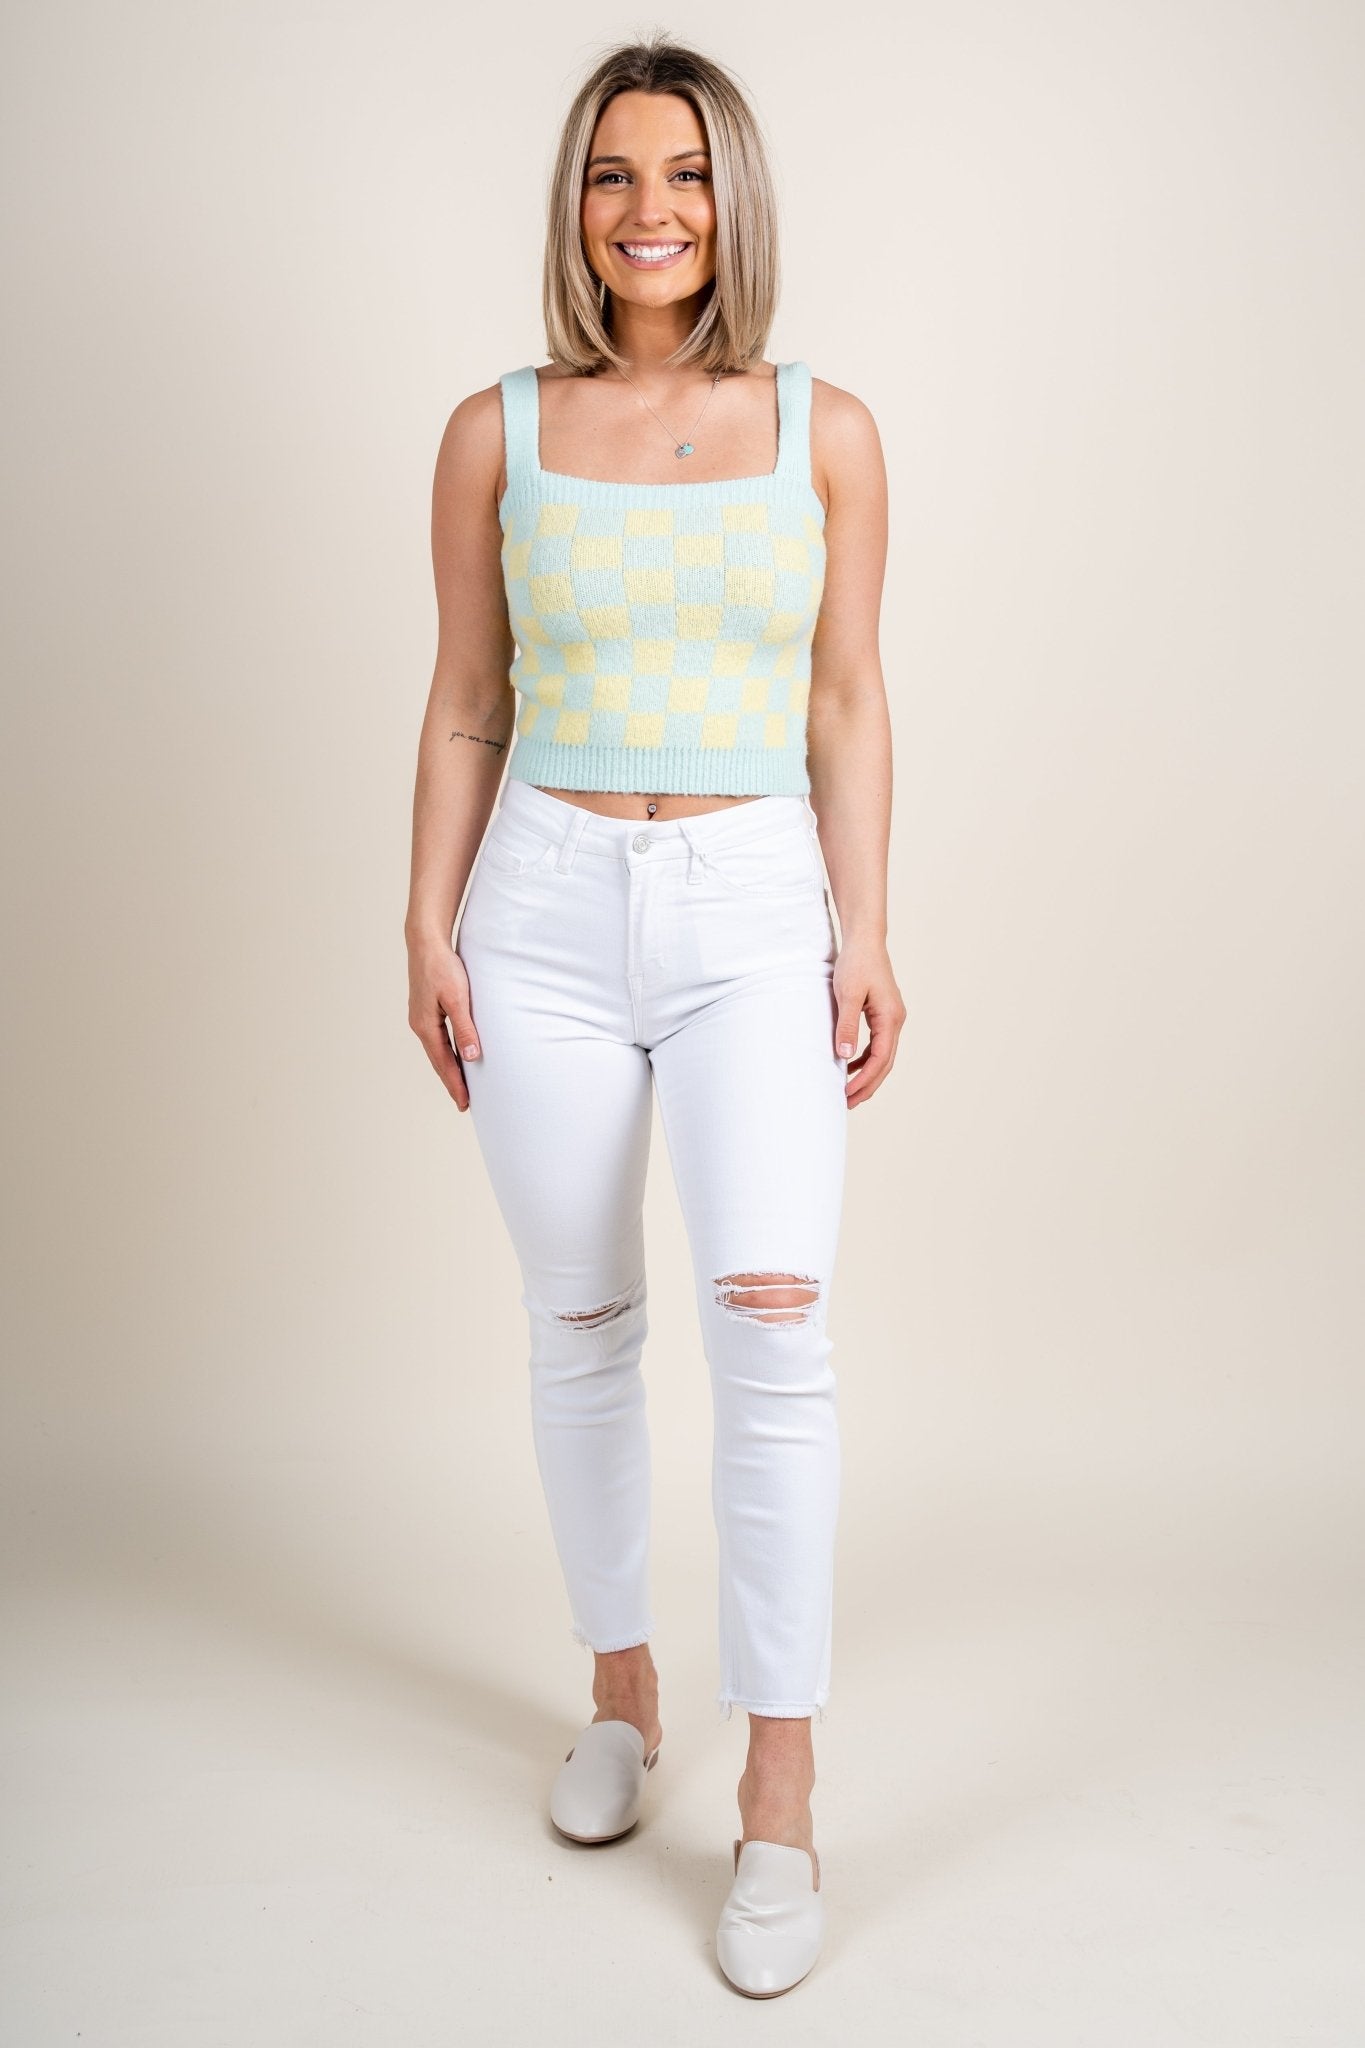 Checkered sweater tank top mint multi - Cute Top - Trendy Easter Clothing Line at Lush Fashion Lounge Boutique in Oklahoma